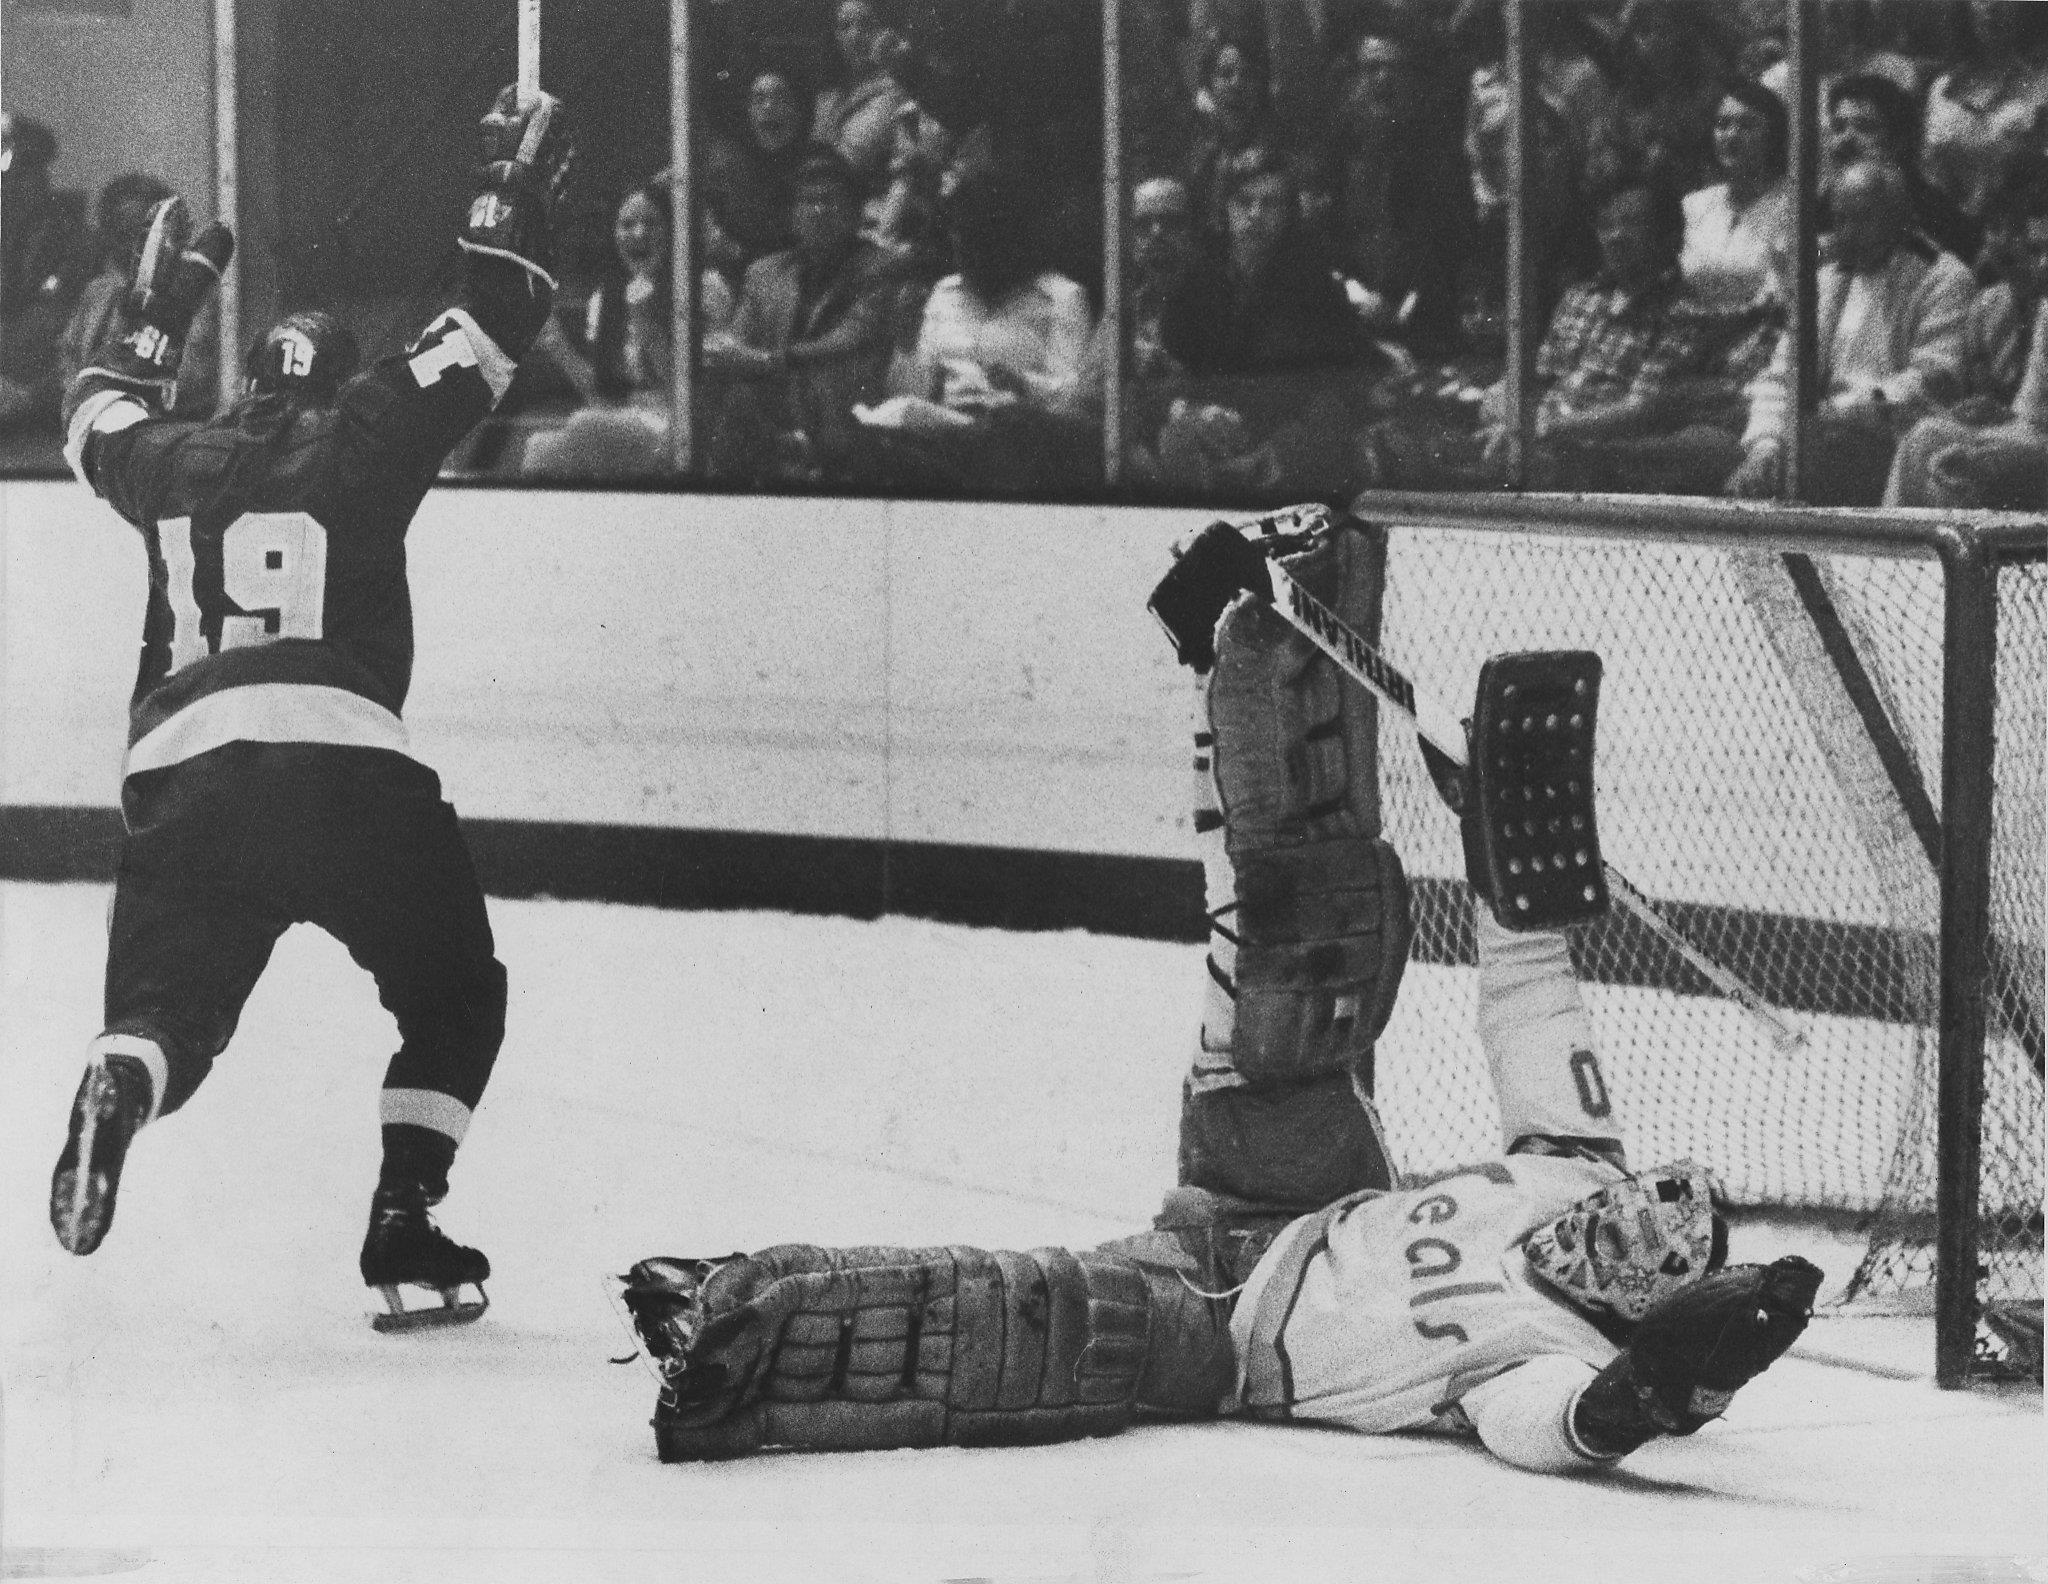 Seals, the Bay Area's first NHL team, had more fun than success